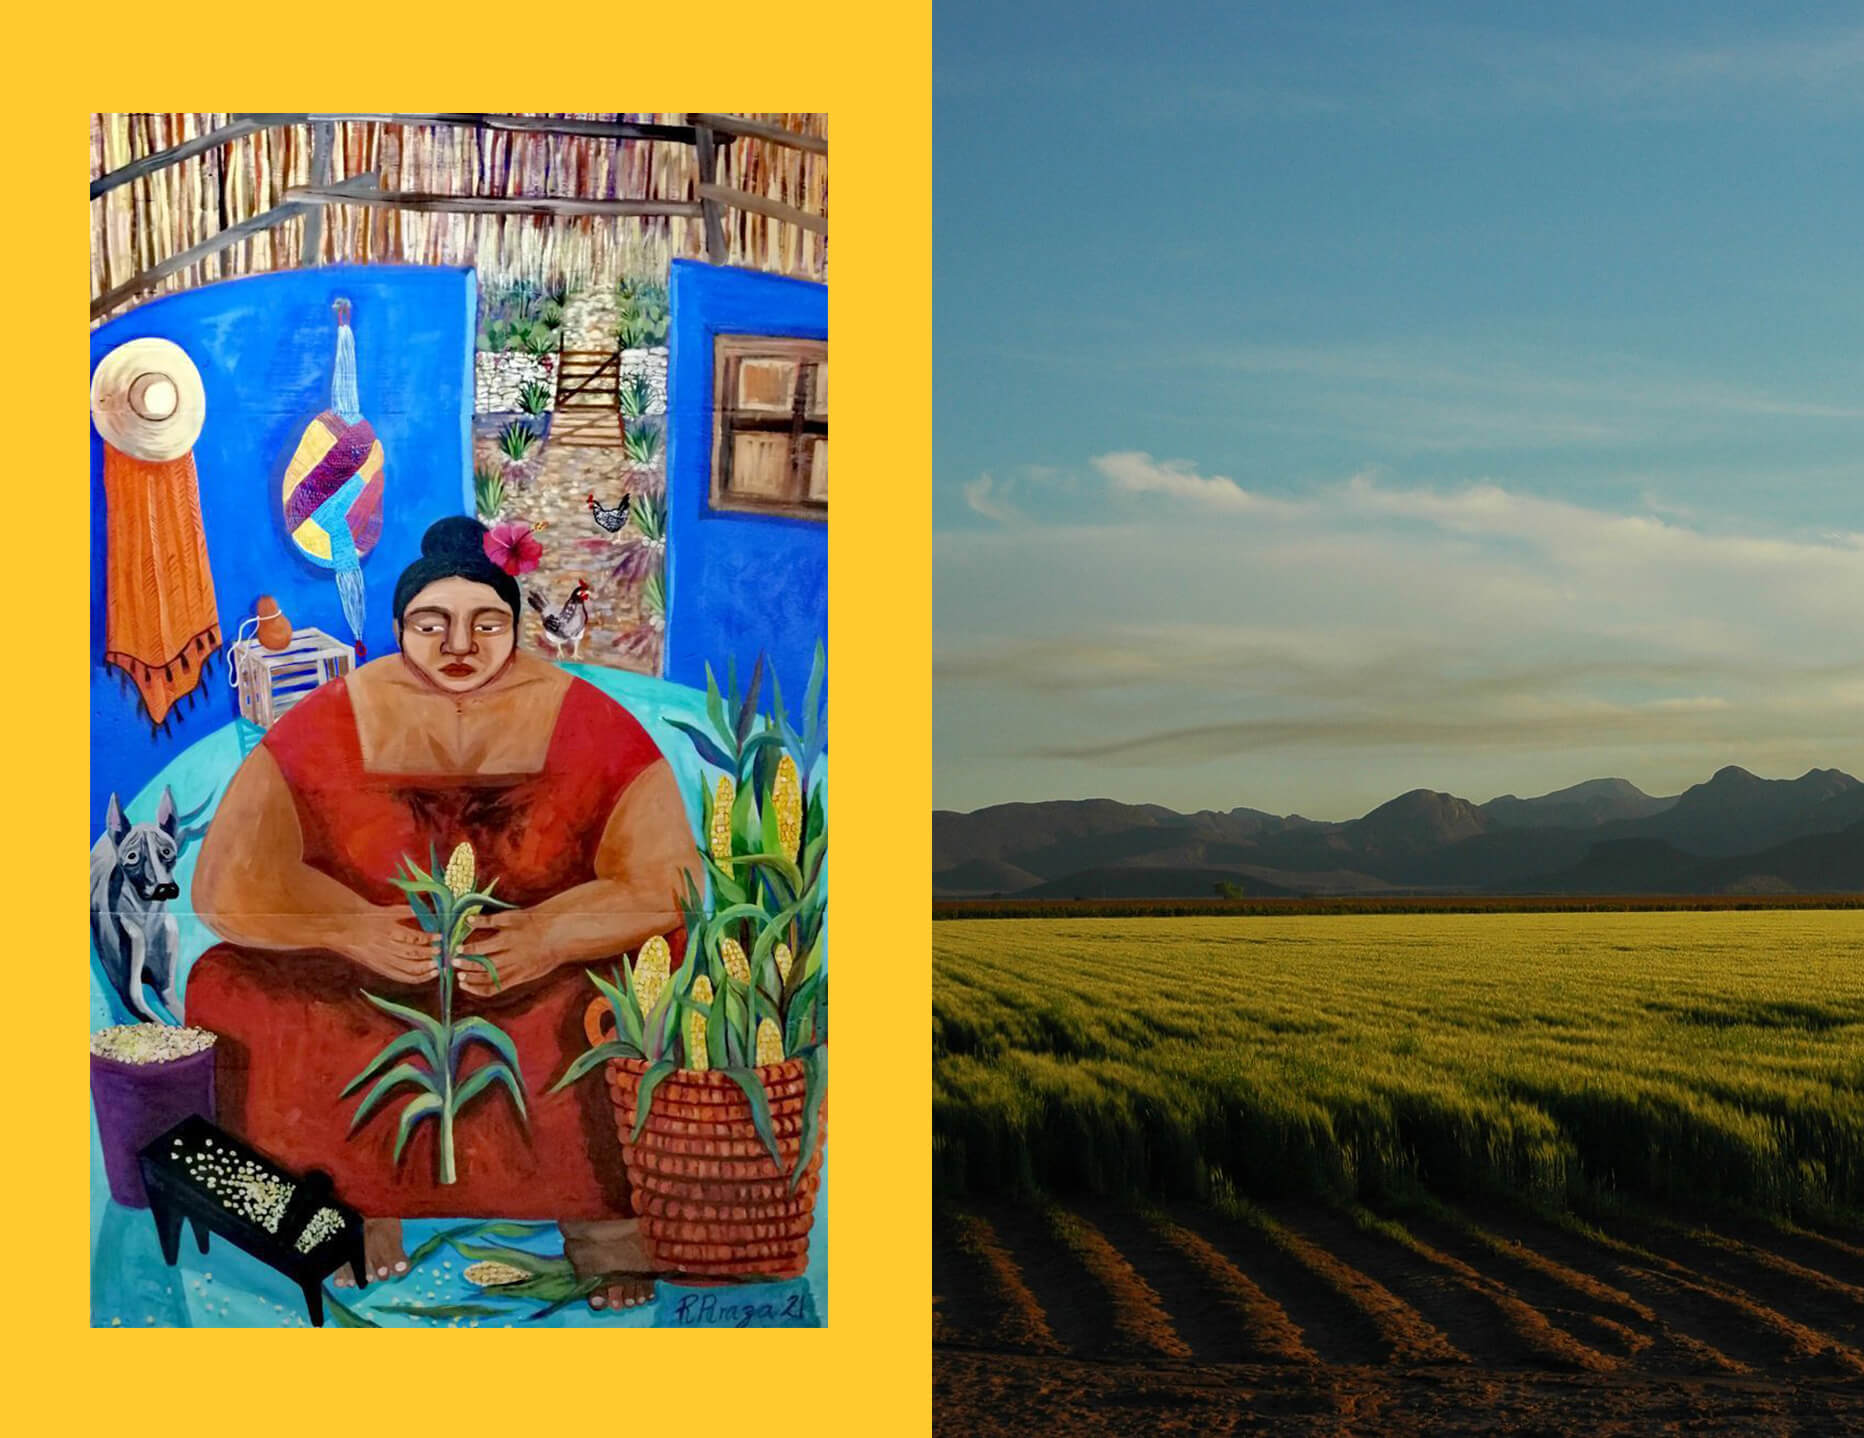 A mural of an indigenous woman shelling corn by Rosy Peraza Rios on the left. And an image of corn fields in Sonora, Mexico on the right. July 2021